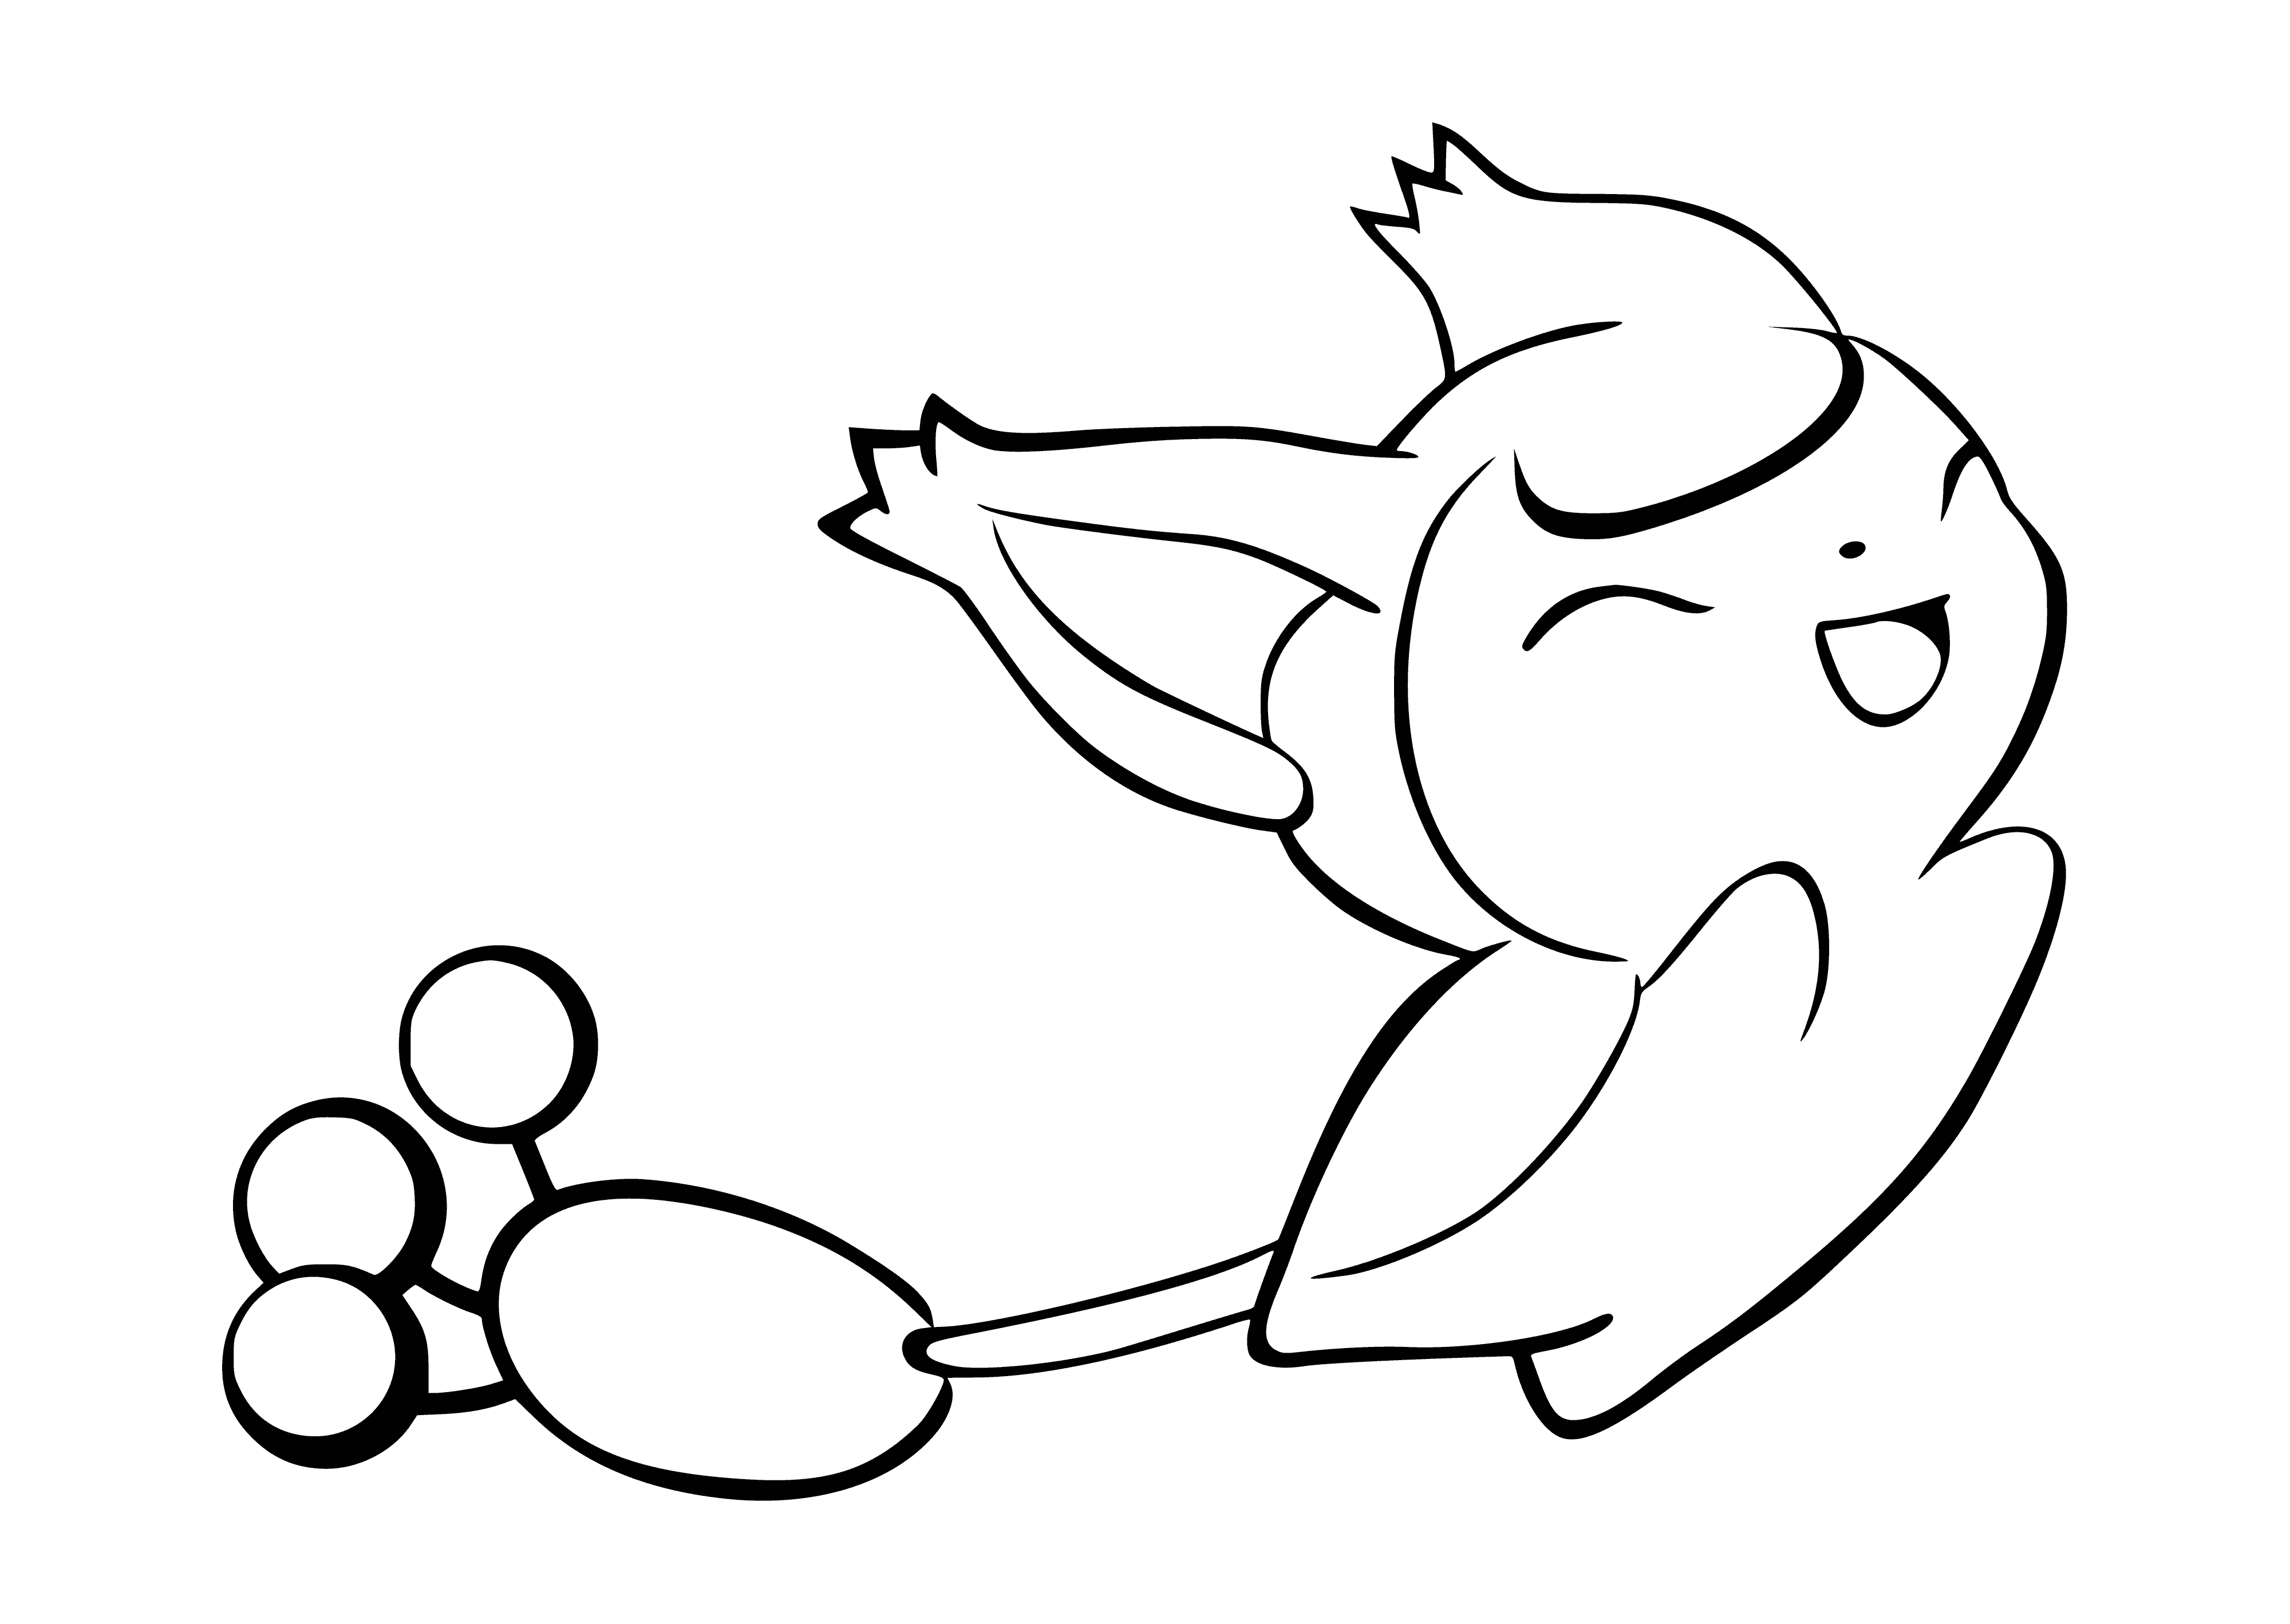 coloring page: A Pokemon named Skitty - small, pink, white, big blue eyes & long tail. Evolves into Delcatty.